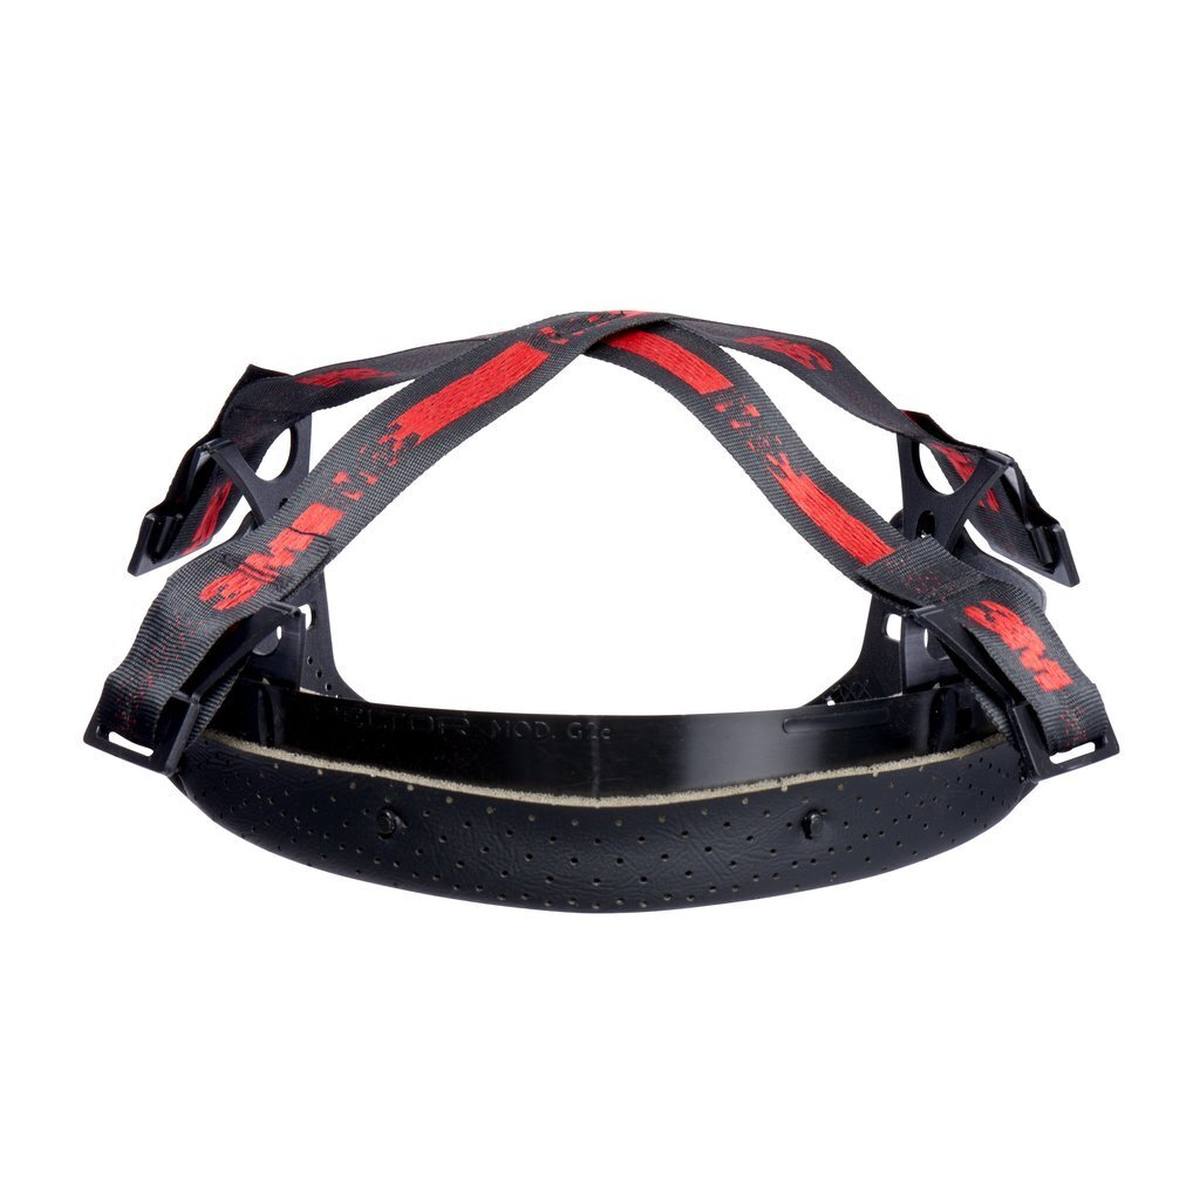 3M Interior fittings for 3M safety helmets with pinlock fastener and plastic welding strap G2C